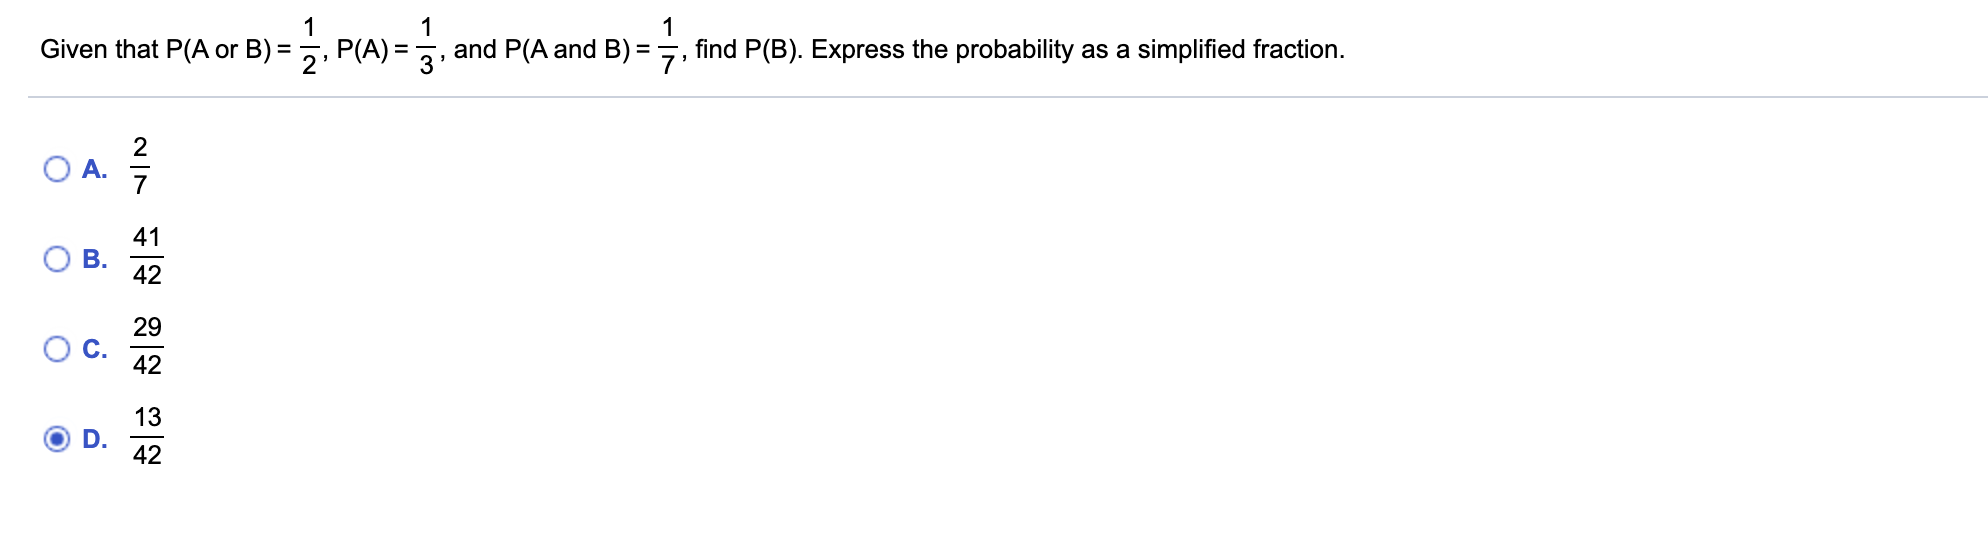 Given that P(A or B) =, P(A) =, and P(A and B) =, find P(B). Express the probability as a simplified fraction.
2
O A.
41
42
29
42
13
D.
42
B.
C.
